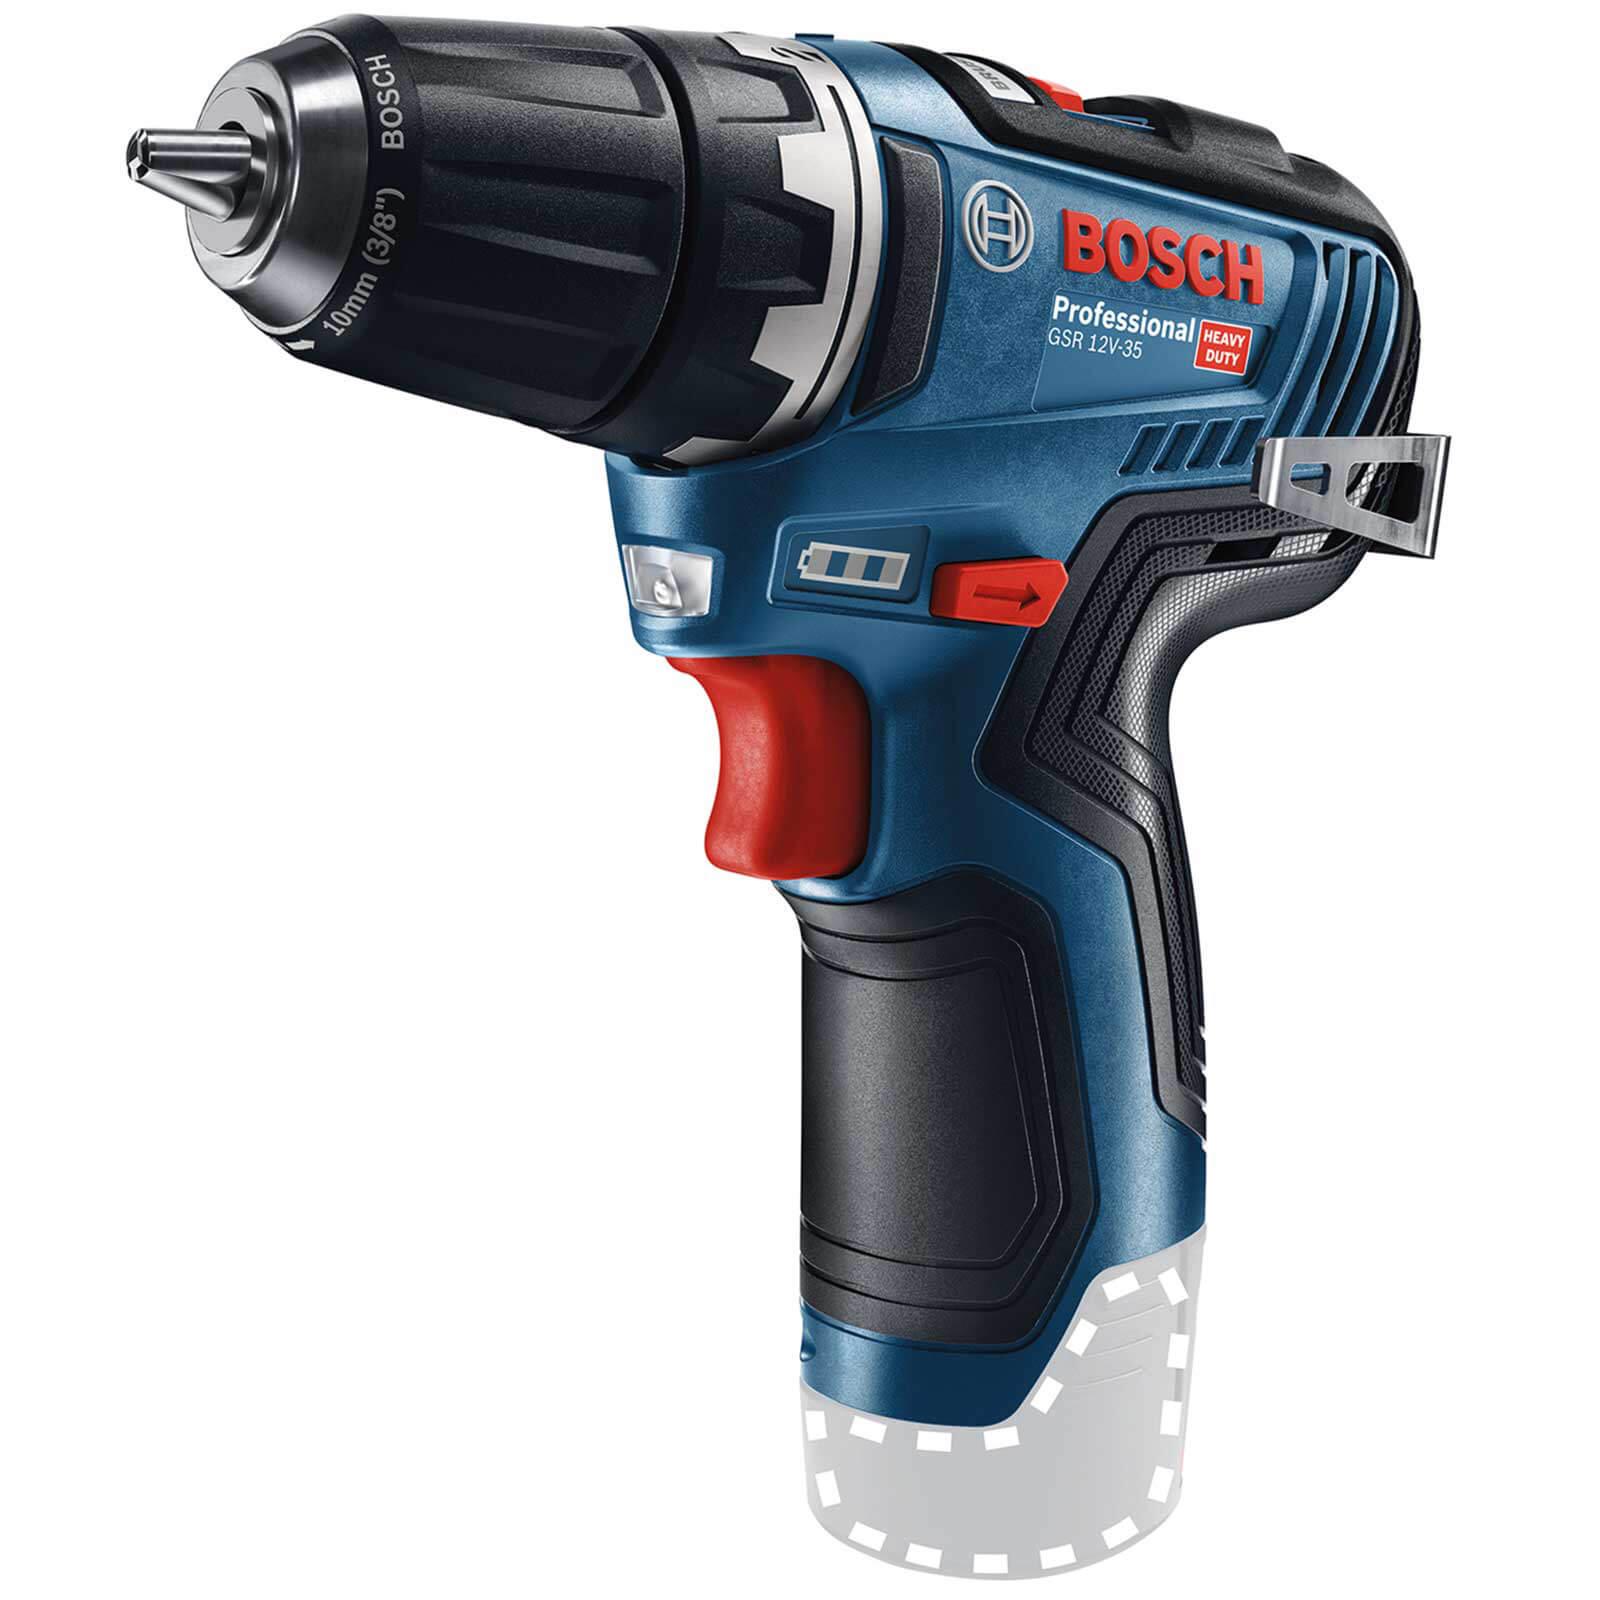 Photo of Bosch Gsr 12v-35 12v Cordless Brushless Drill Driver No Batteries No Charger No Case